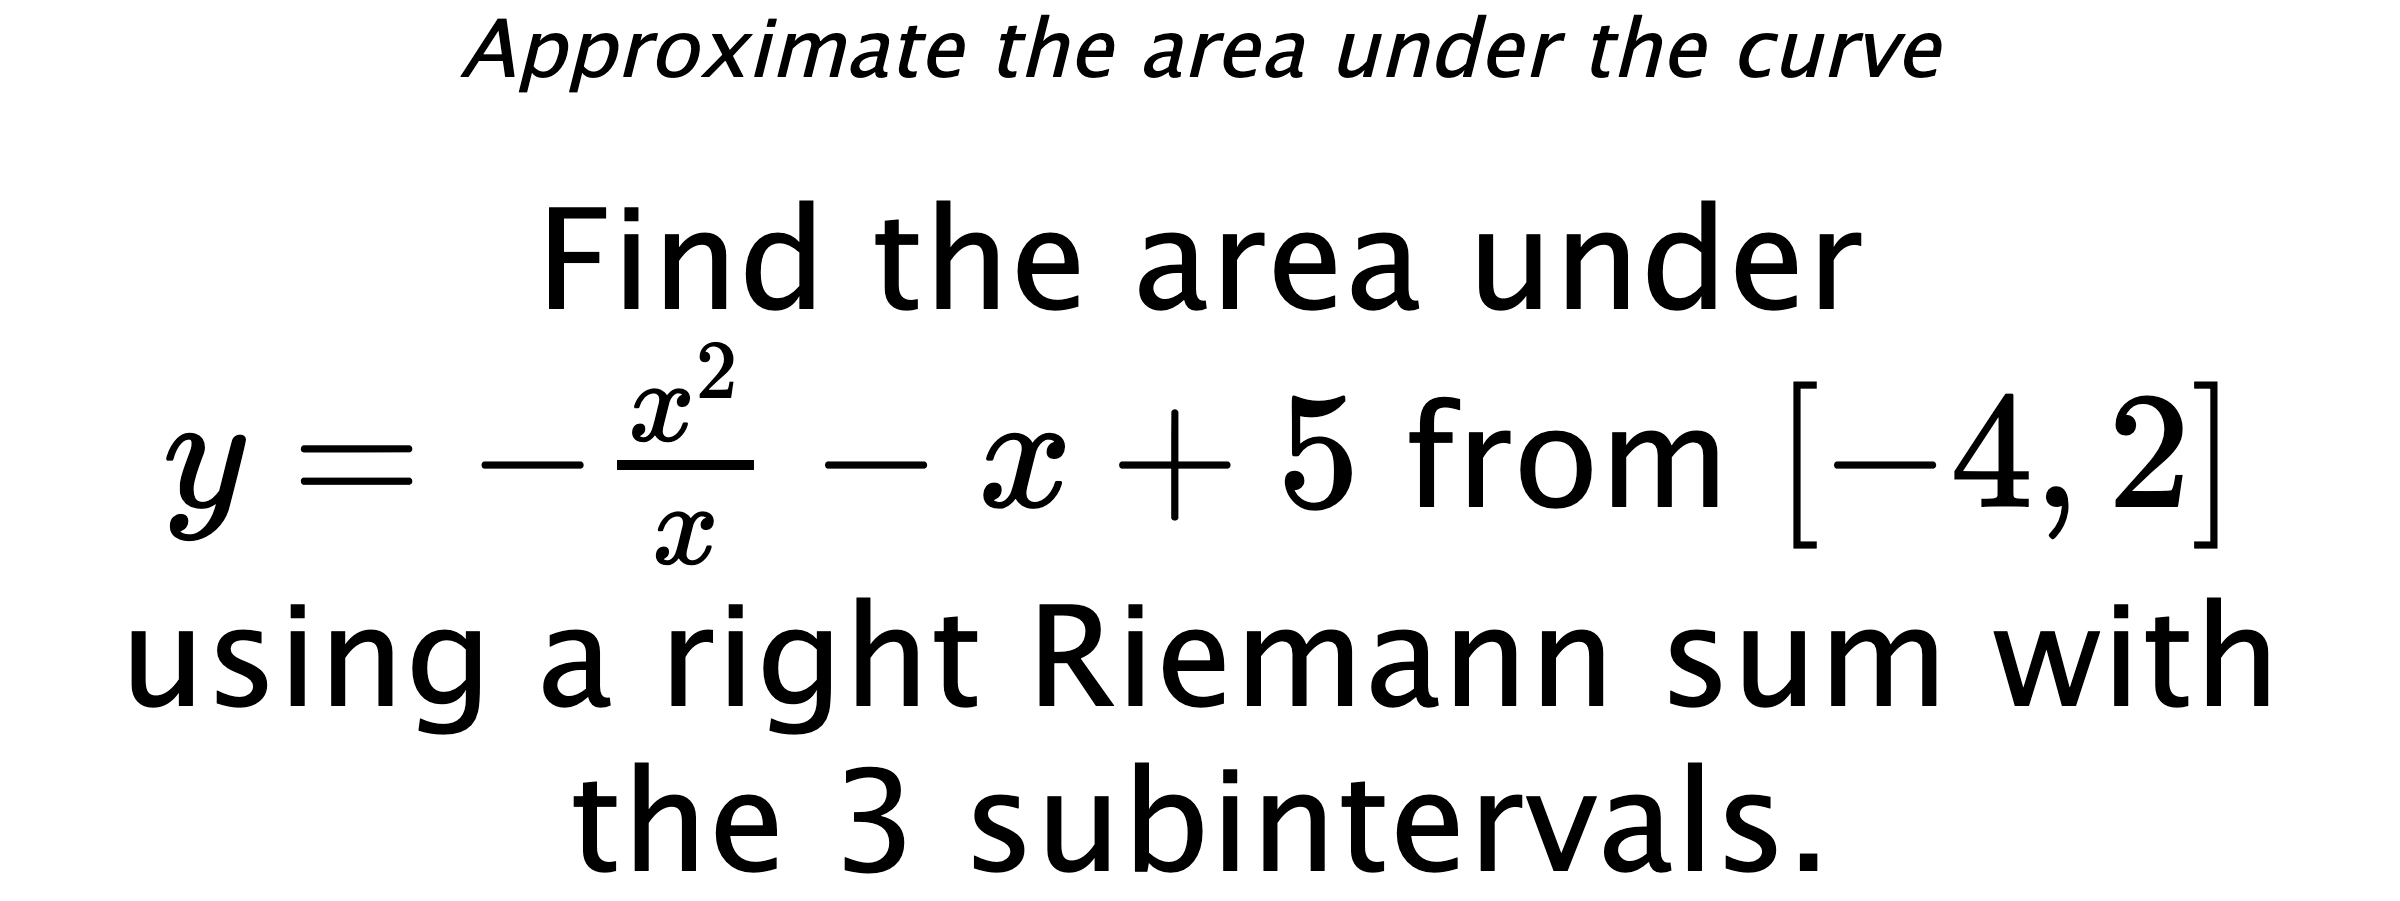 Approximate the area under the curve Find the area under $ y=-\frac{x^2}{x}-x+5 $ from $ [-4,2] $ using a right Riemann sum with the 3 subintervals.